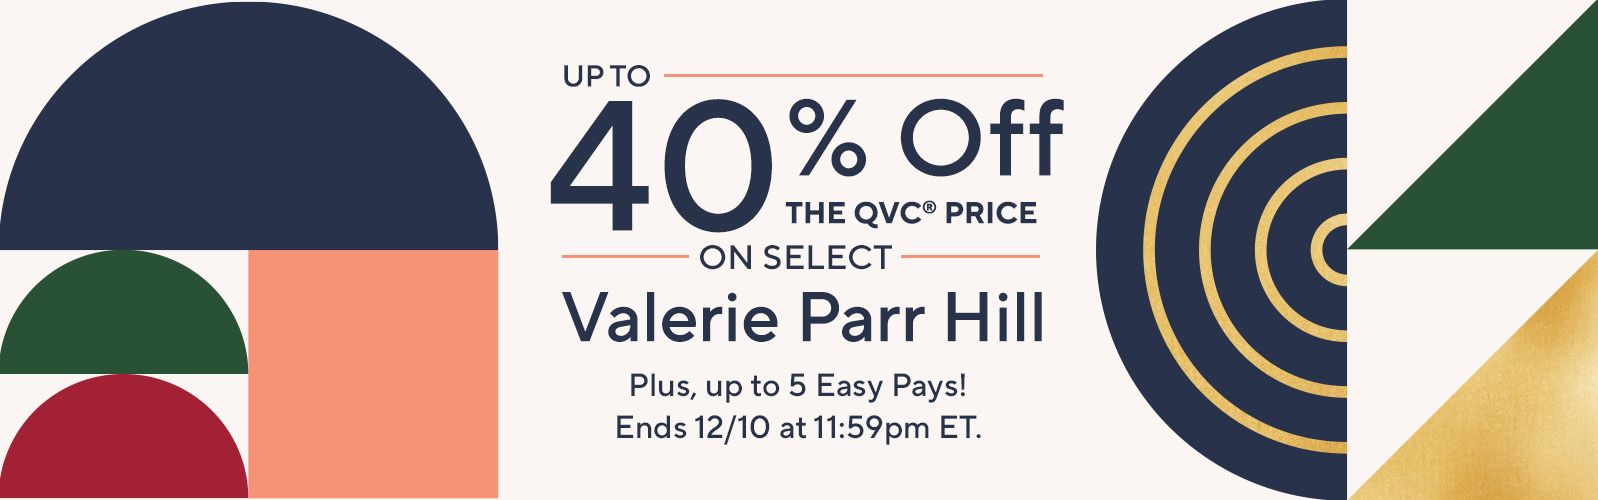 Up to 40% Off the QVC Price on Select Valerie Parr Hill Plus, up to 5 Easy Pays! Ends 12/10 at 11:59pm ET